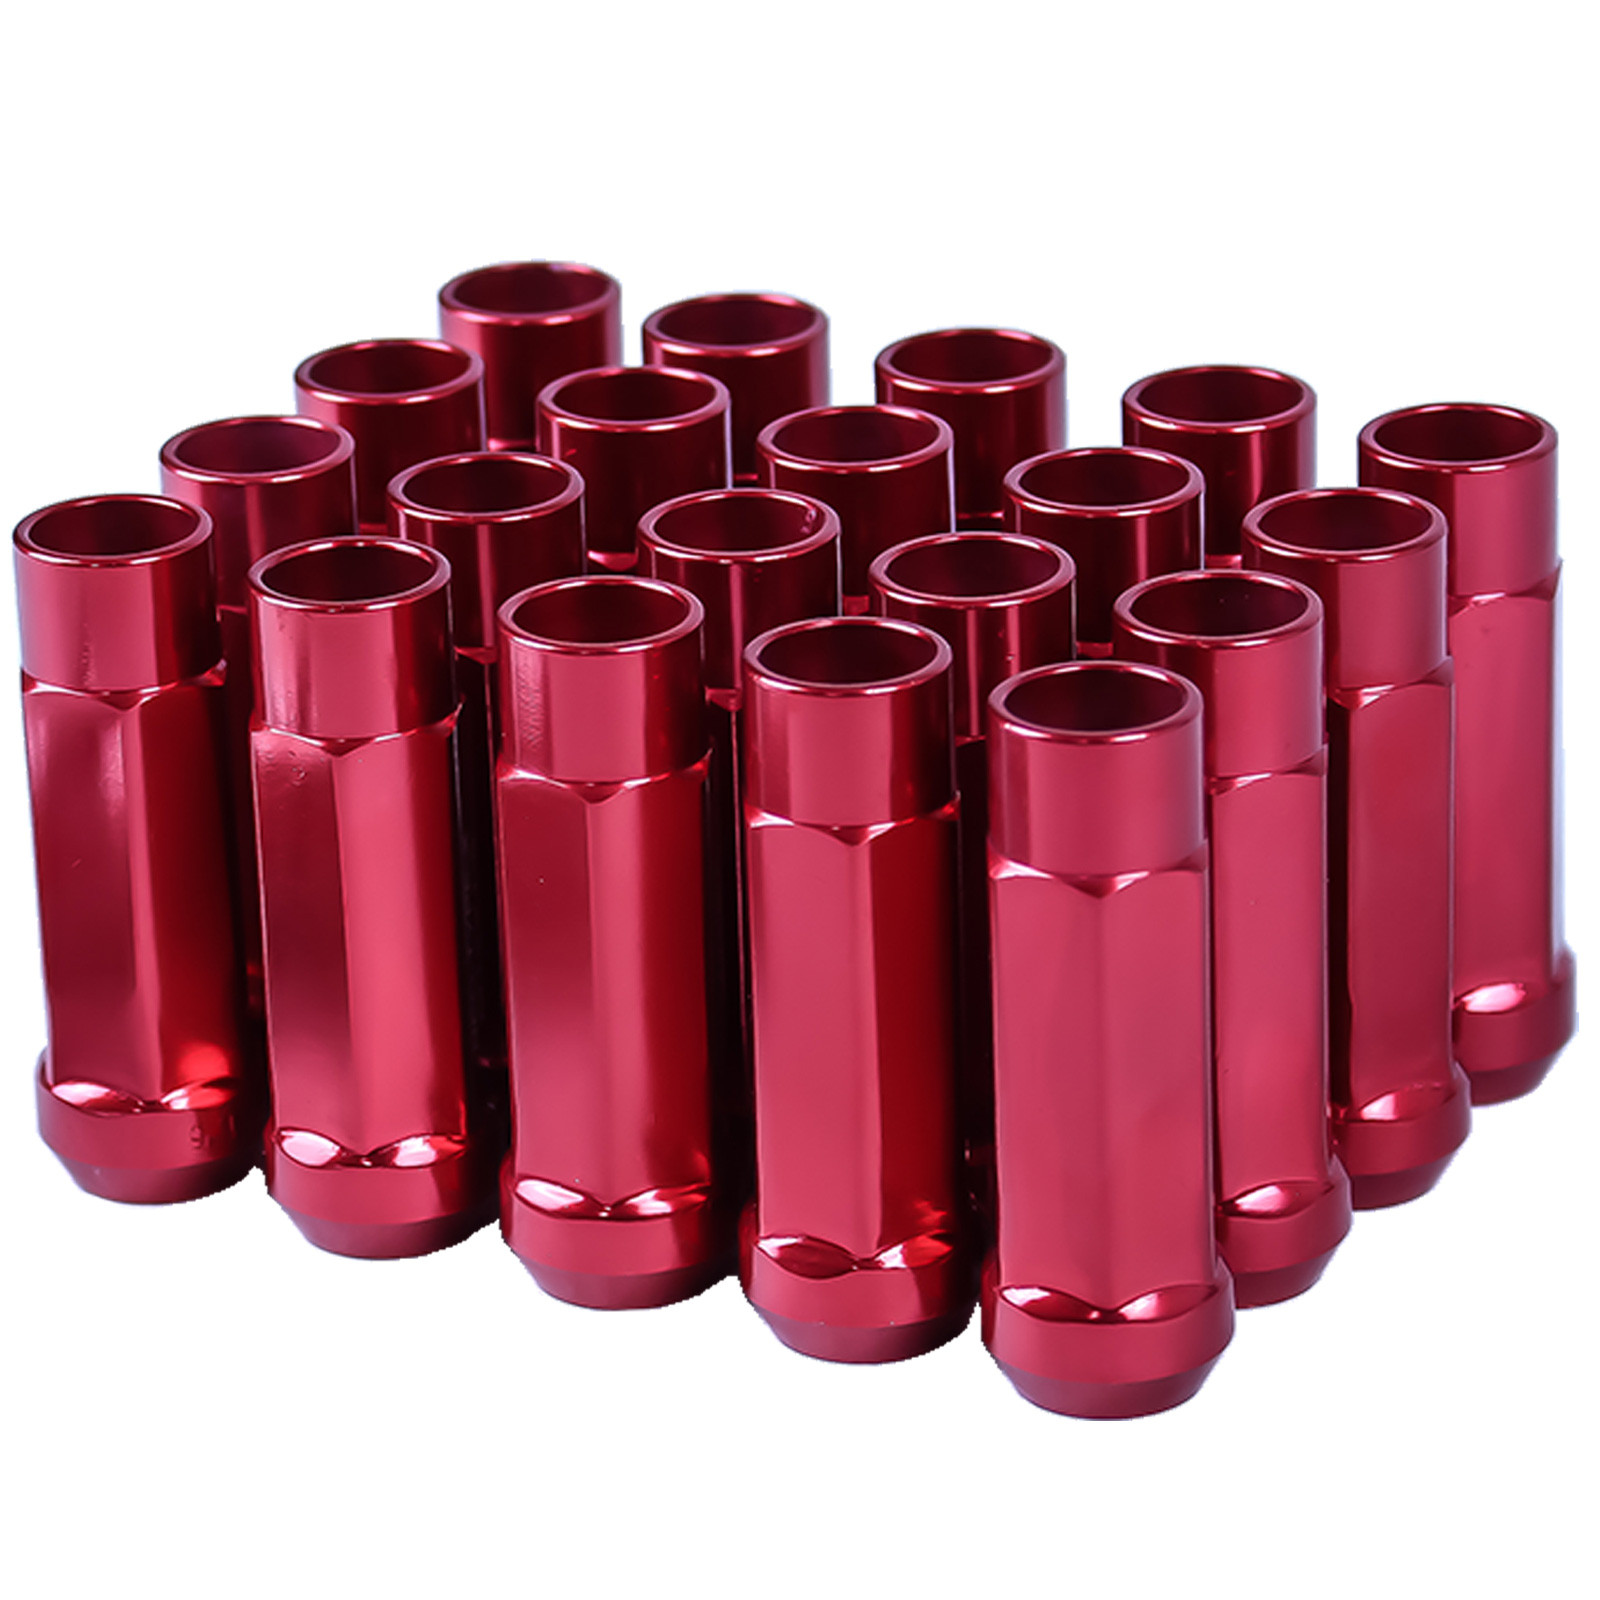 1 OPEN M12X1.25 60MM EXTENDED ALUMINUM TUNER RACING LUG NUT For Toyota86 Red 